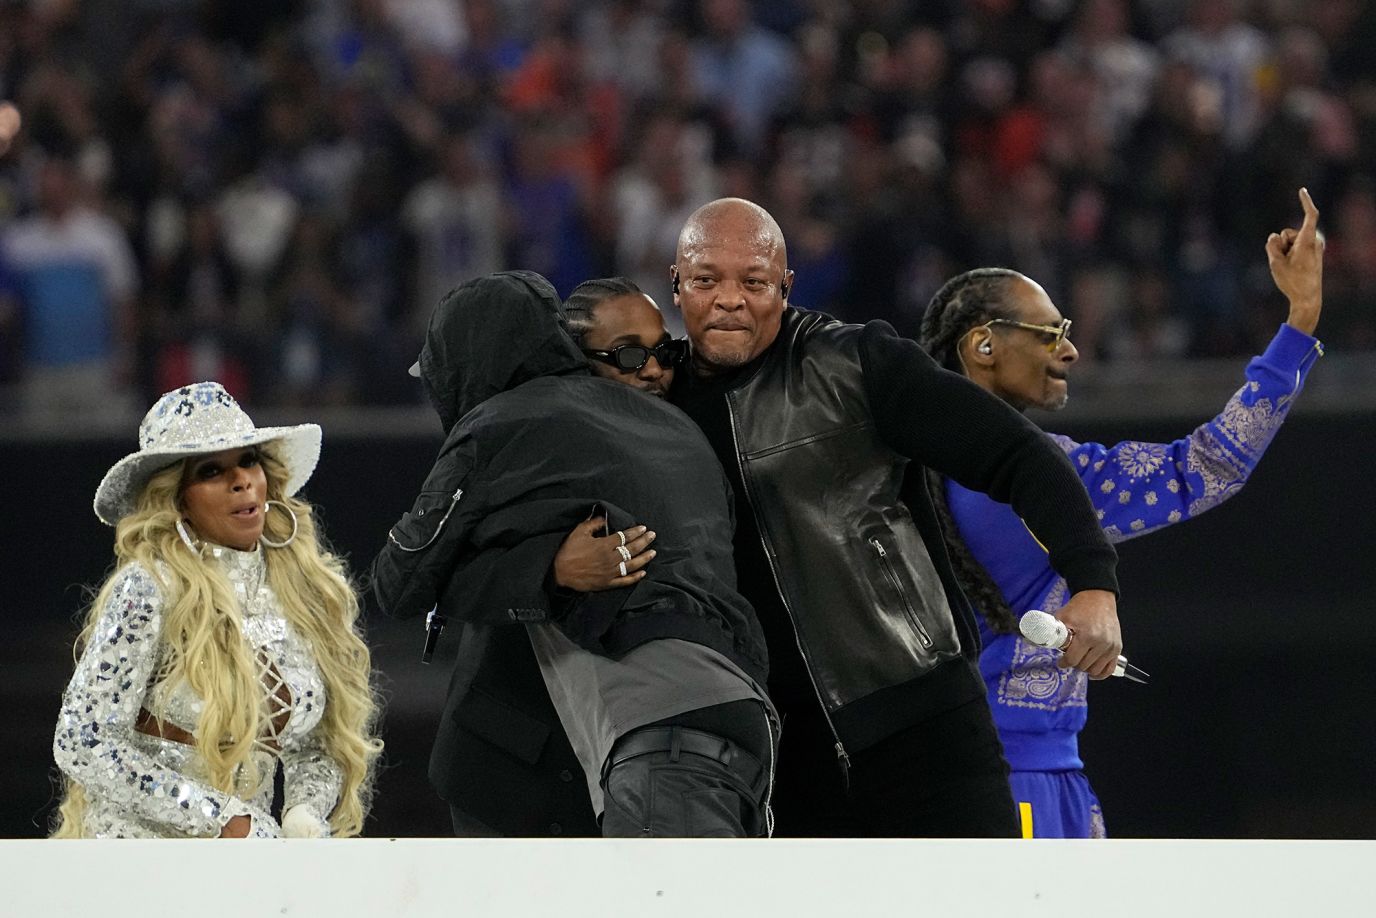 Super Bowl Halftime Show' 2022 free live stream: How to watch Dr. Dre,  Kendrick Lamar, Eminem, Mary J. Blige online without cable 